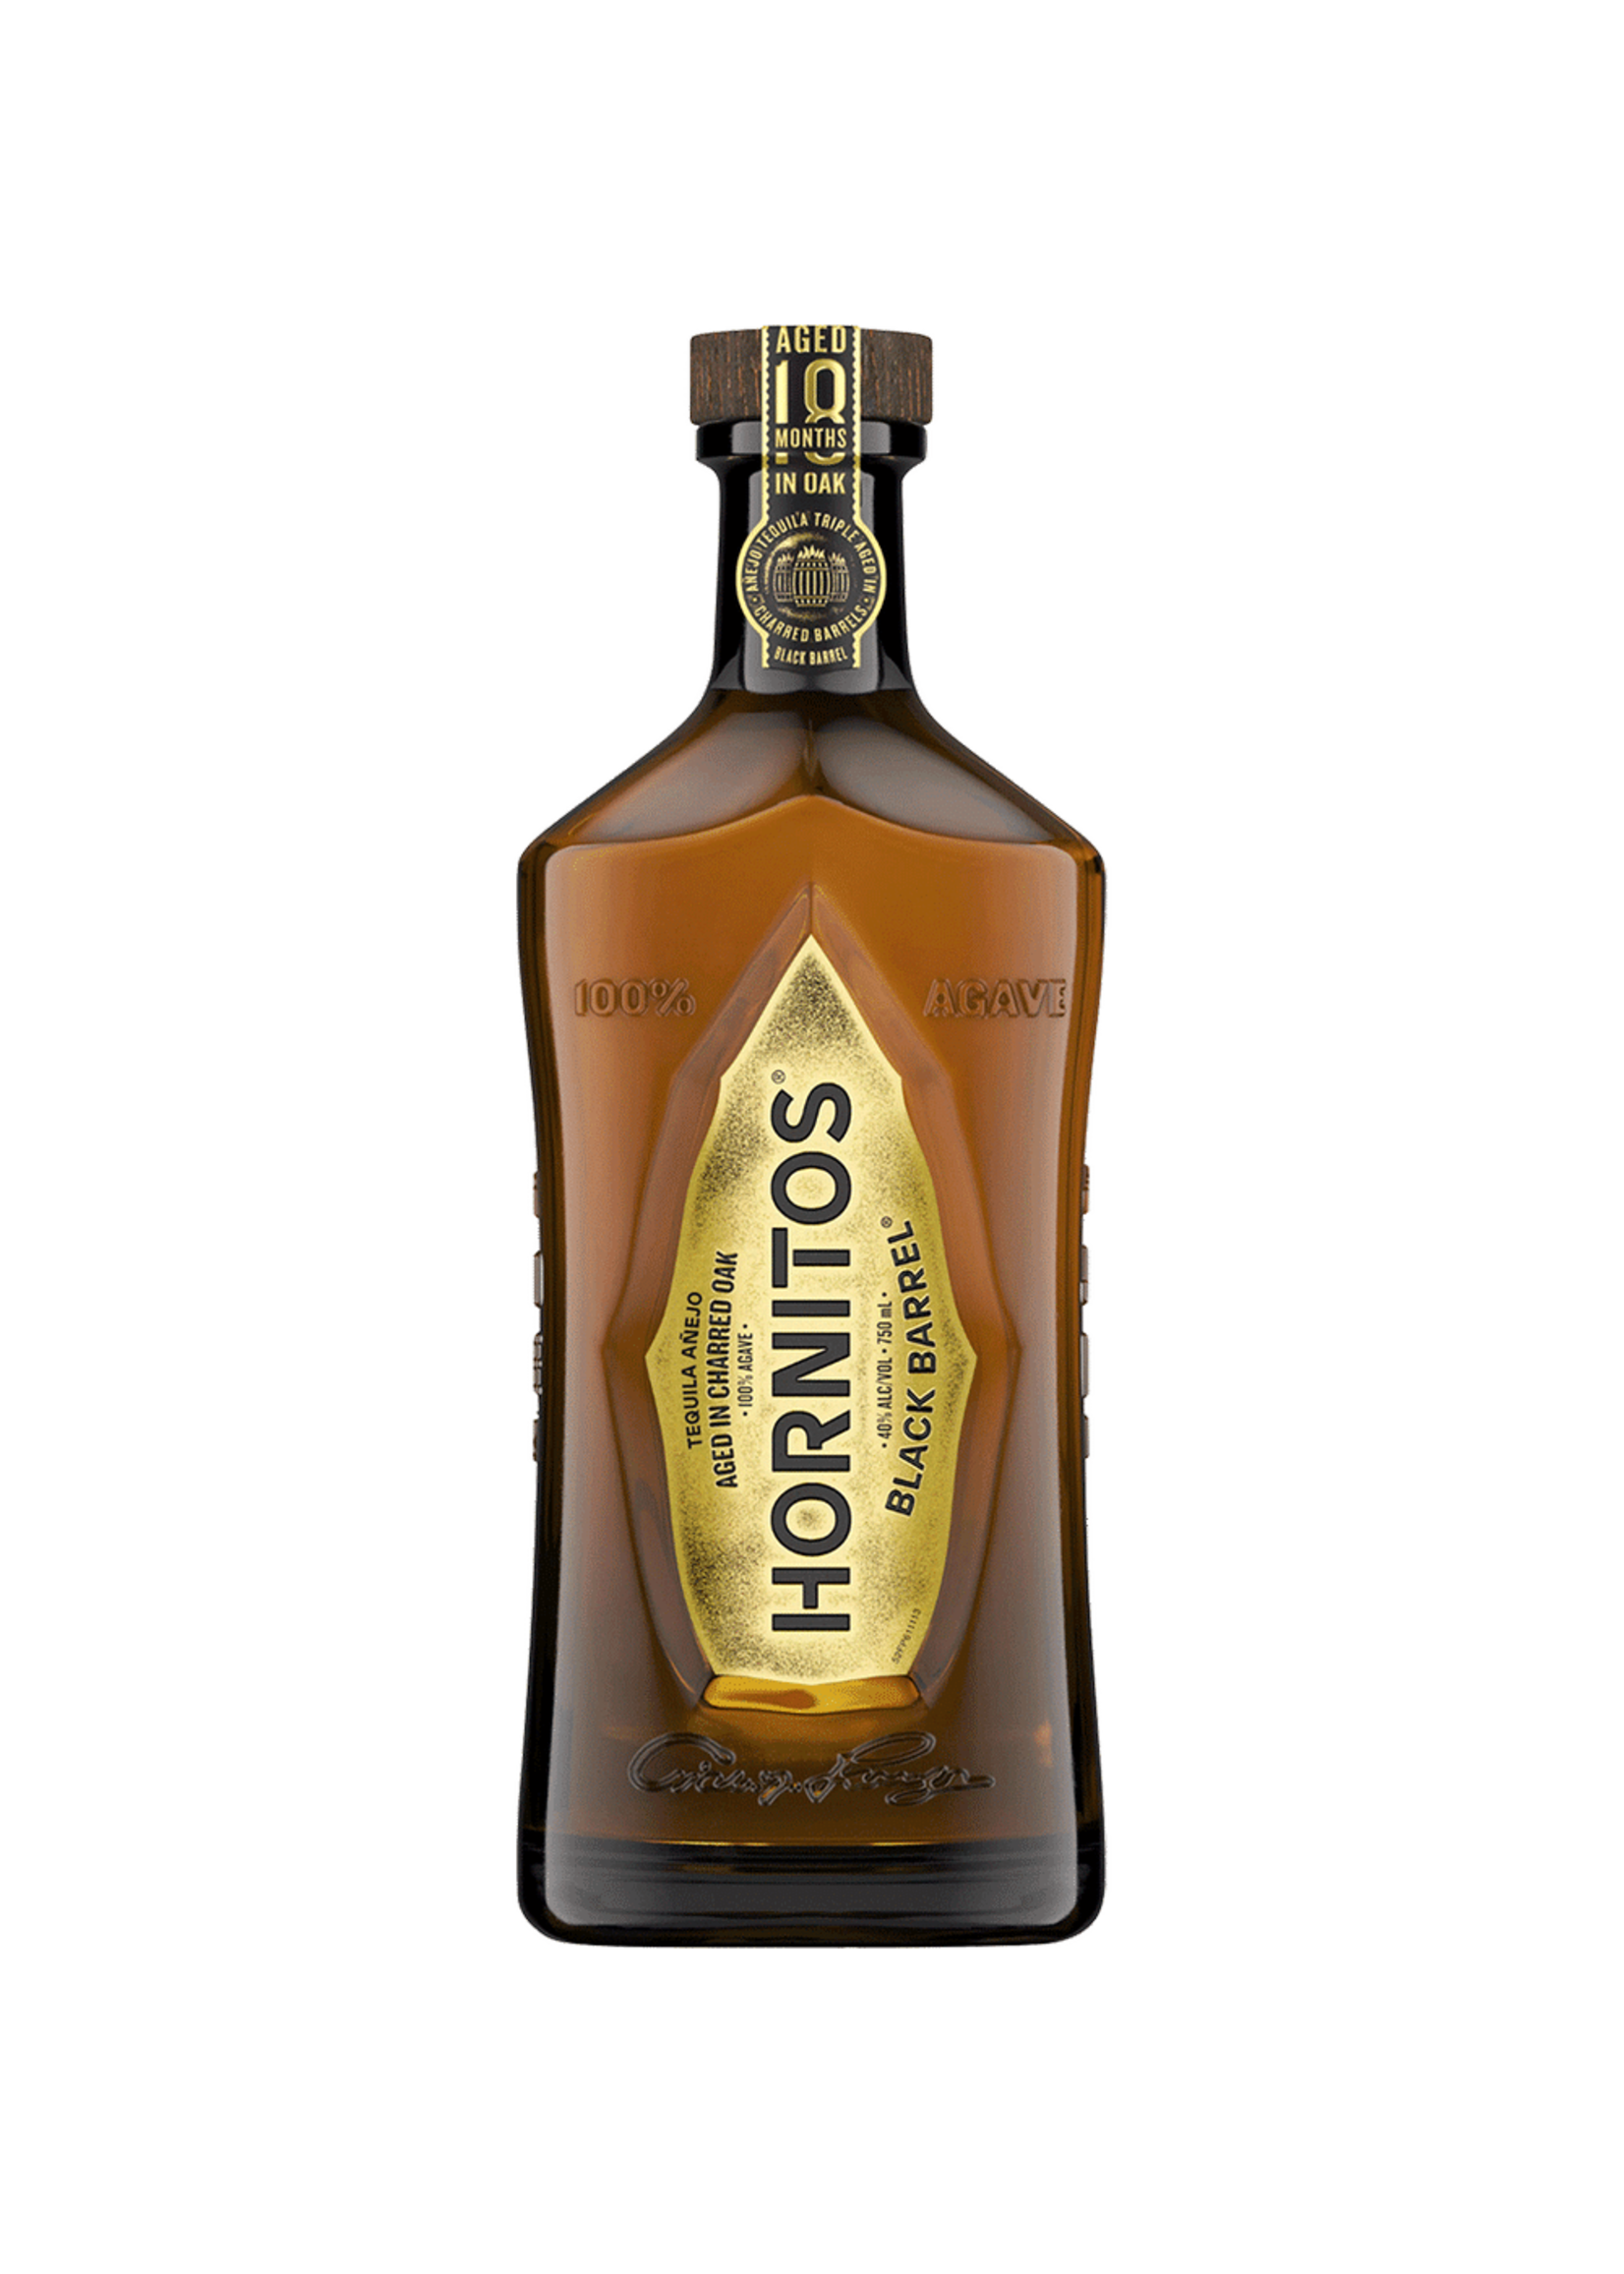 Hornitos Tequila Hornitos Black Barrel Tequila 80Proof 750ml